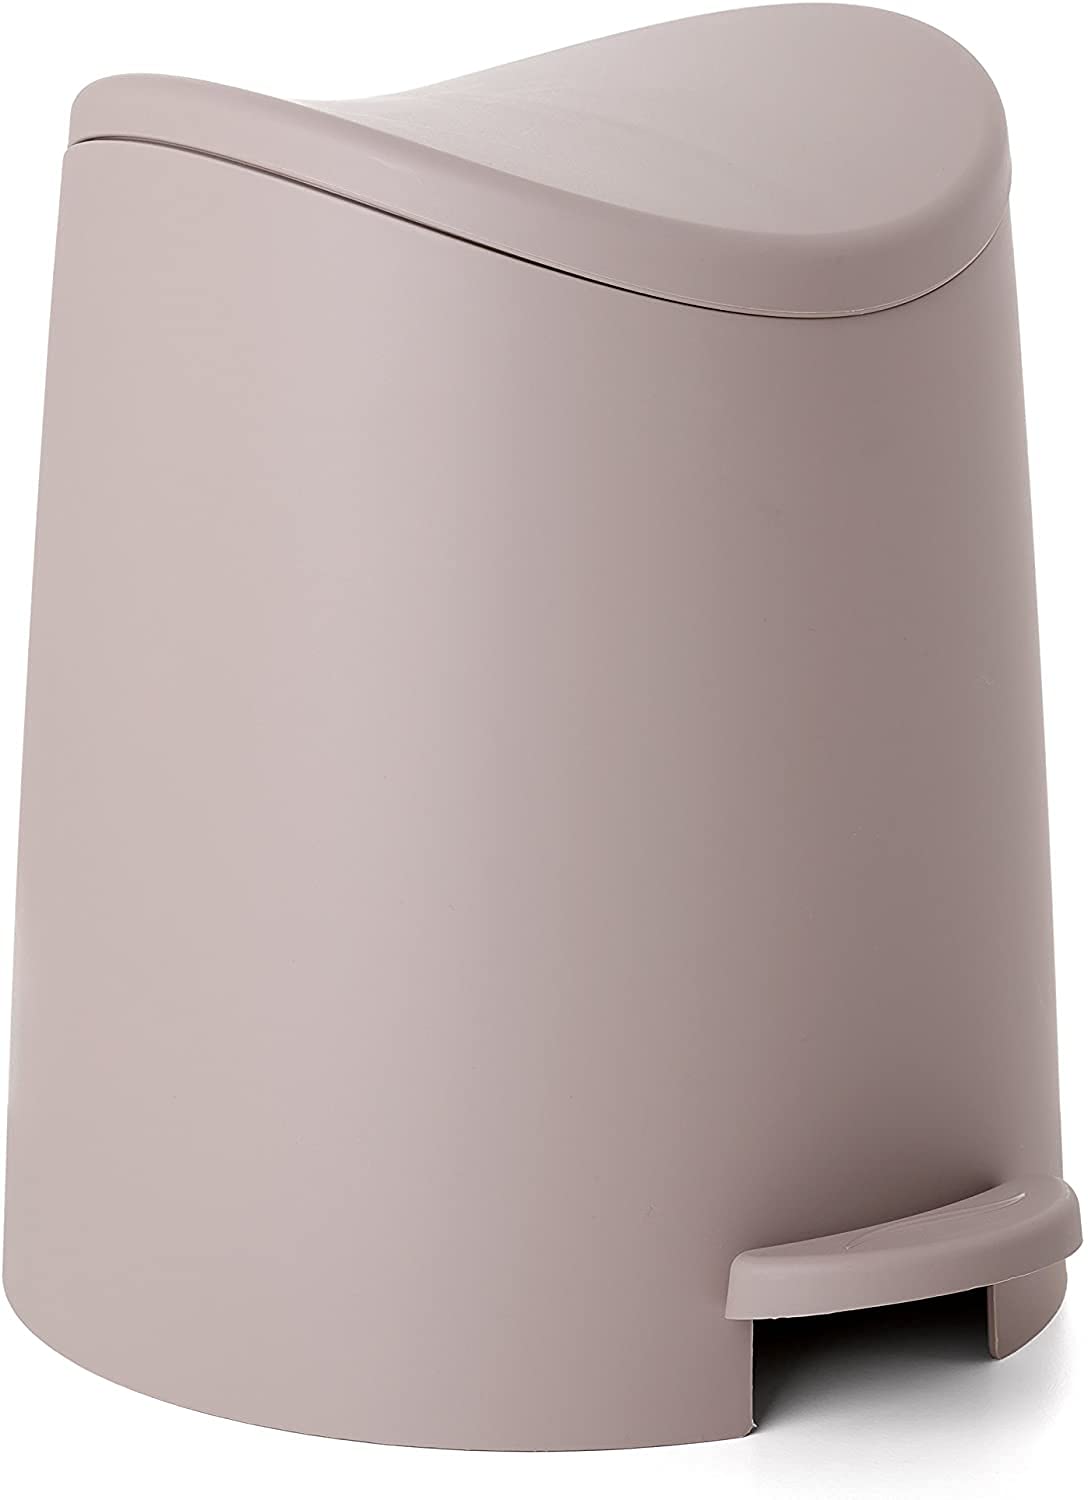 Modern Step-on Curved Lid Trash Can, 3 Liter - Taupe